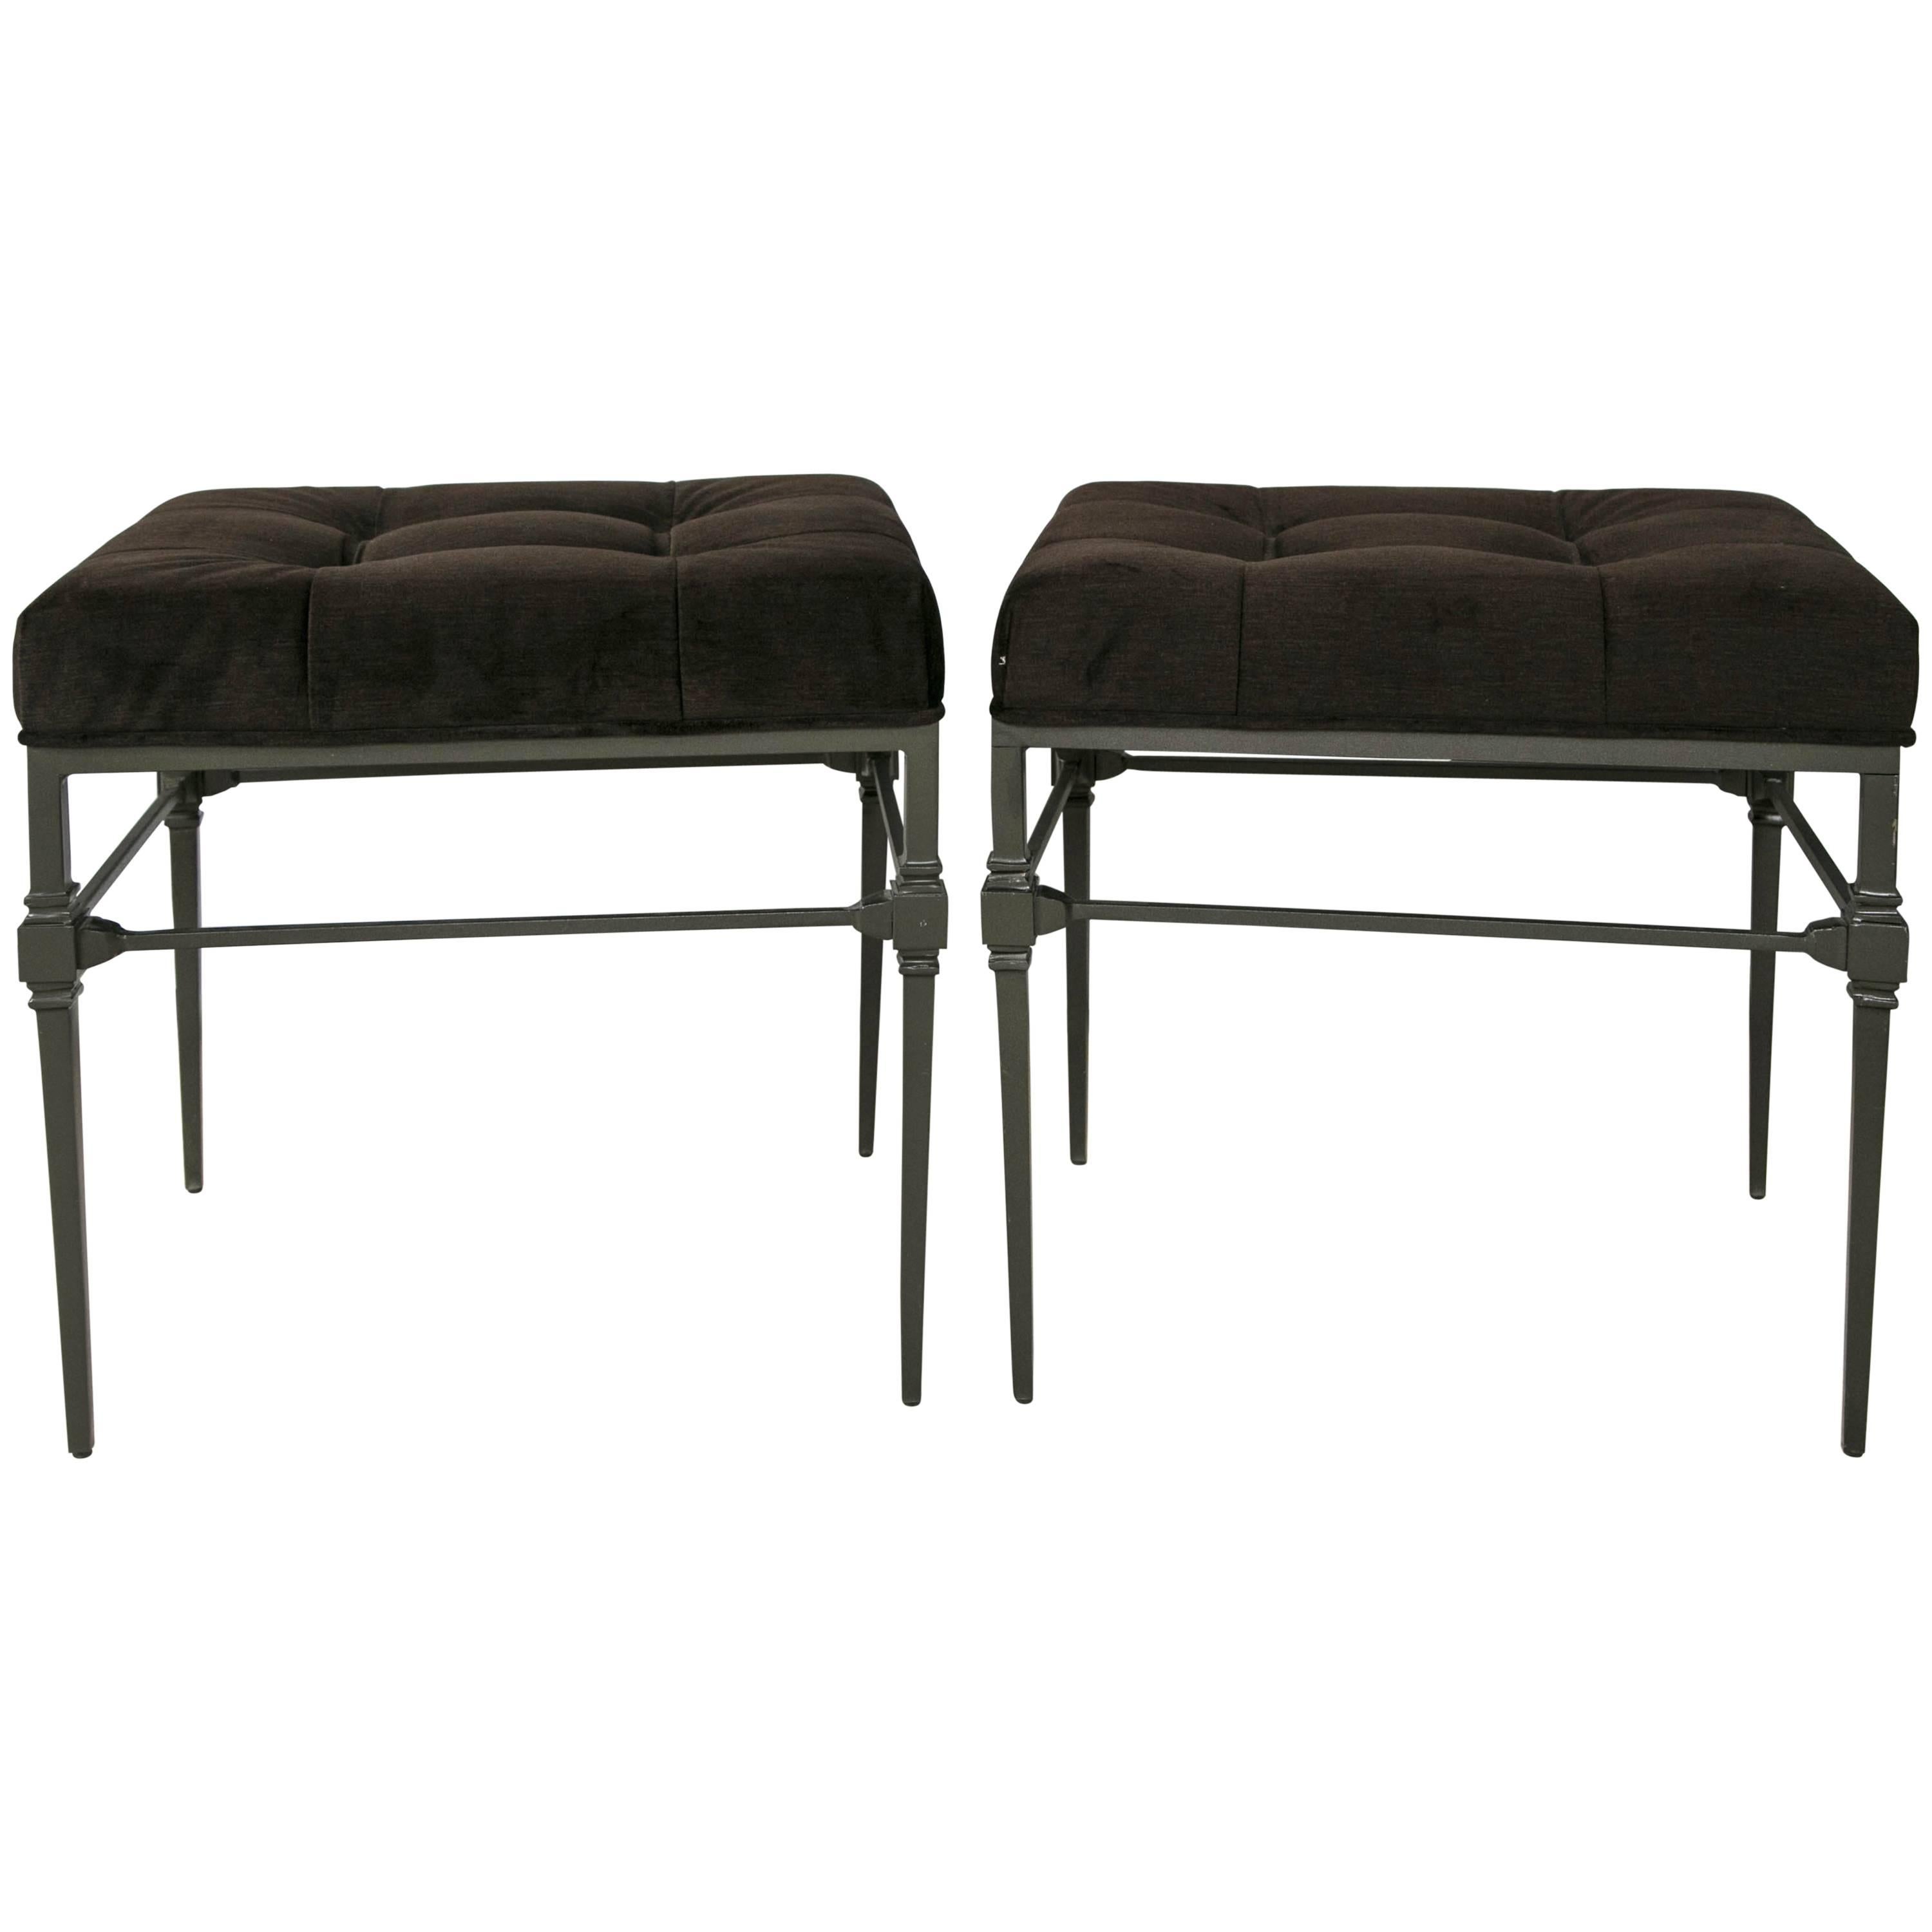 Wrought Iron Benches or Stools